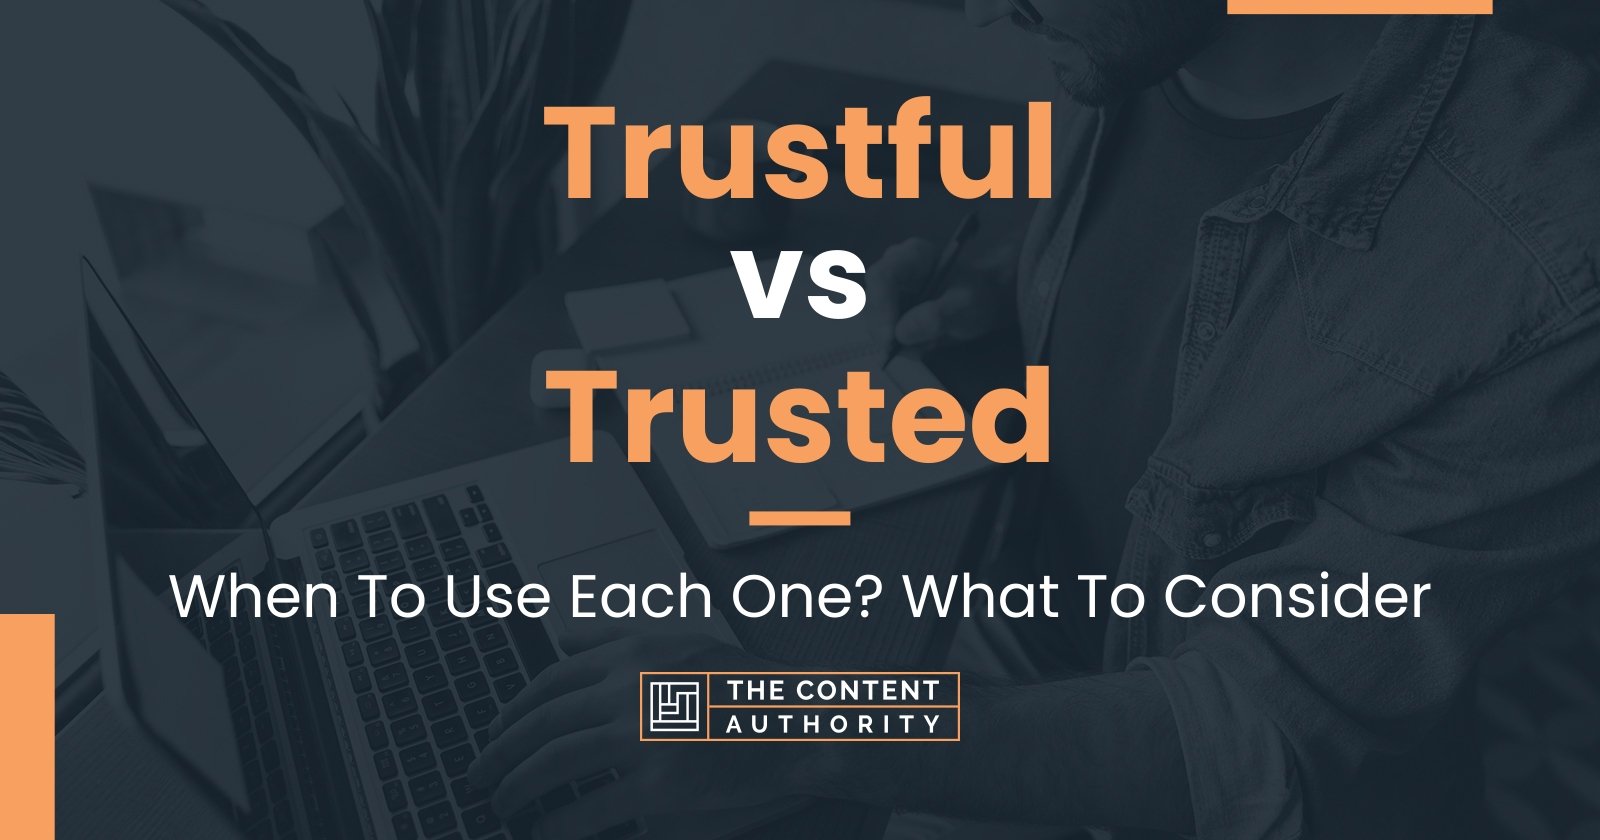 Trustful vs Trusted: When To Use Each One? What To Consider